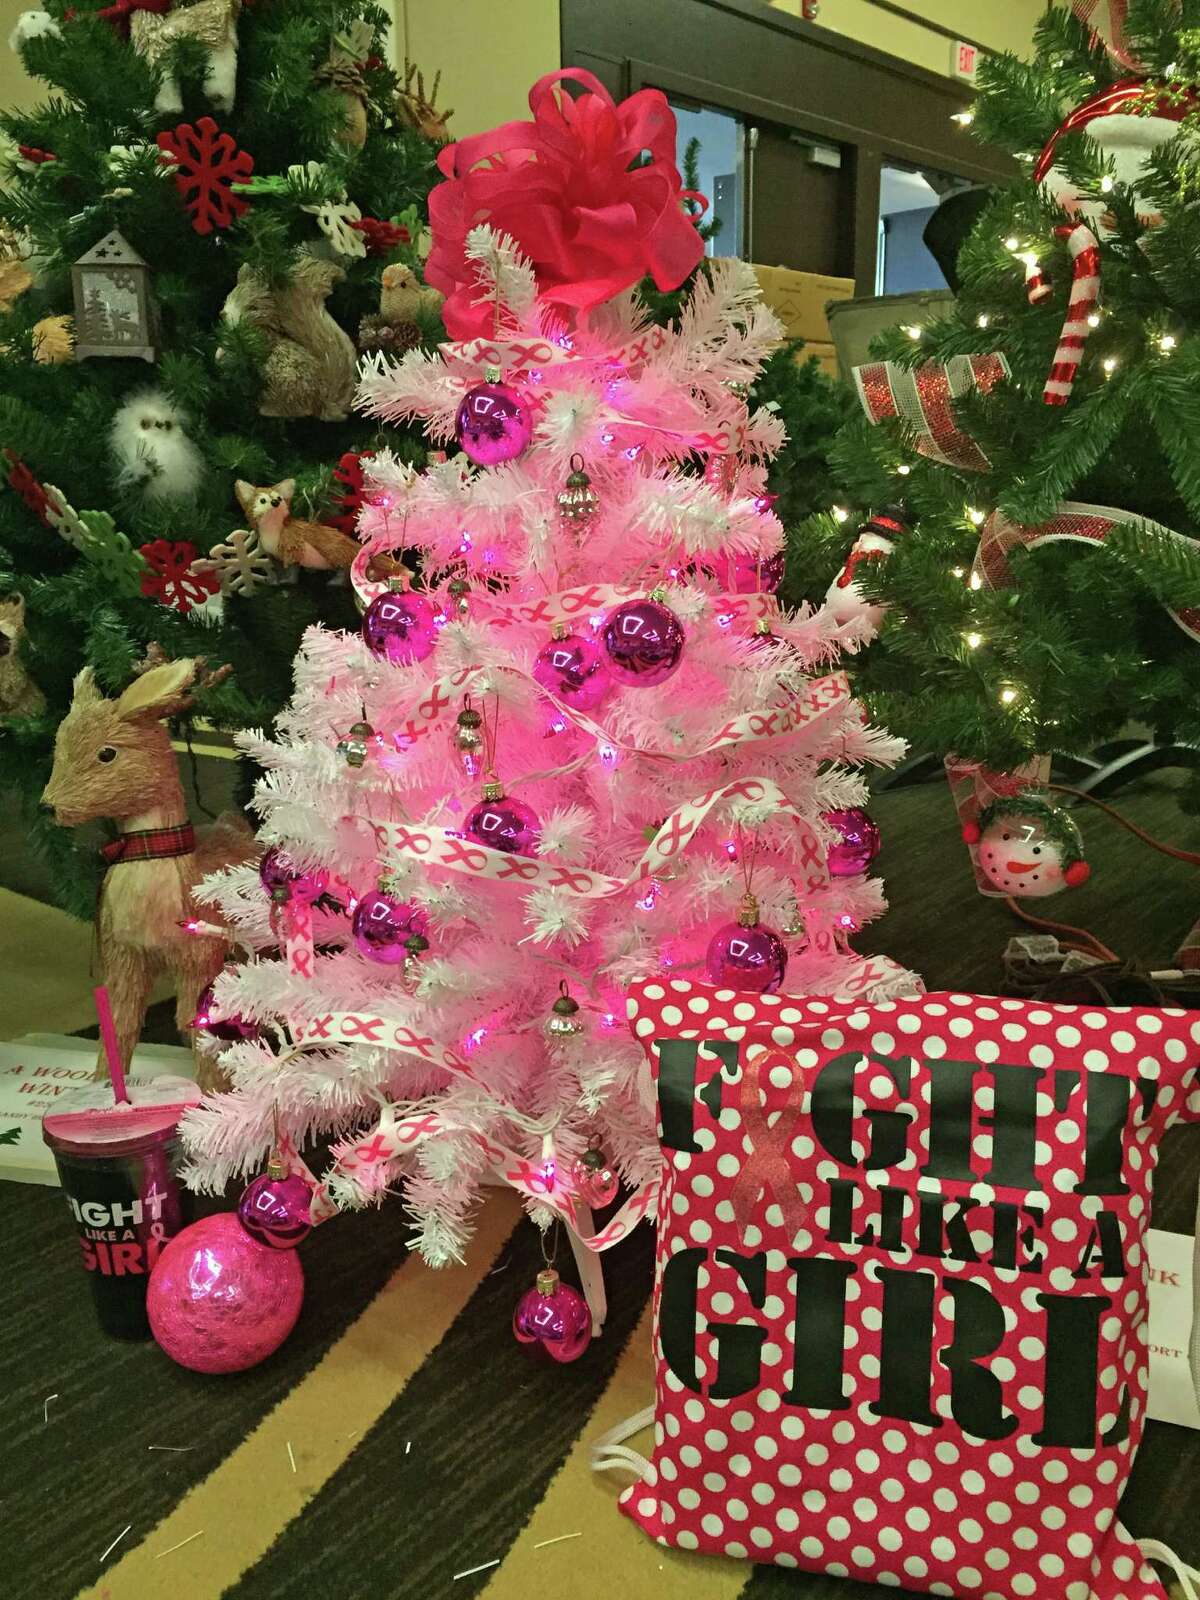 The Junior League of Greenwich’s Enchanted Forest fundraiser devoted one Christmas tree for breast cancer awareness. On Jan. 6, the Junior League will be launching its first Young Women’s Breast Cancer Support Group, which is also the first peer-to-peer style breast cancer support group for young women in Fairfield County.